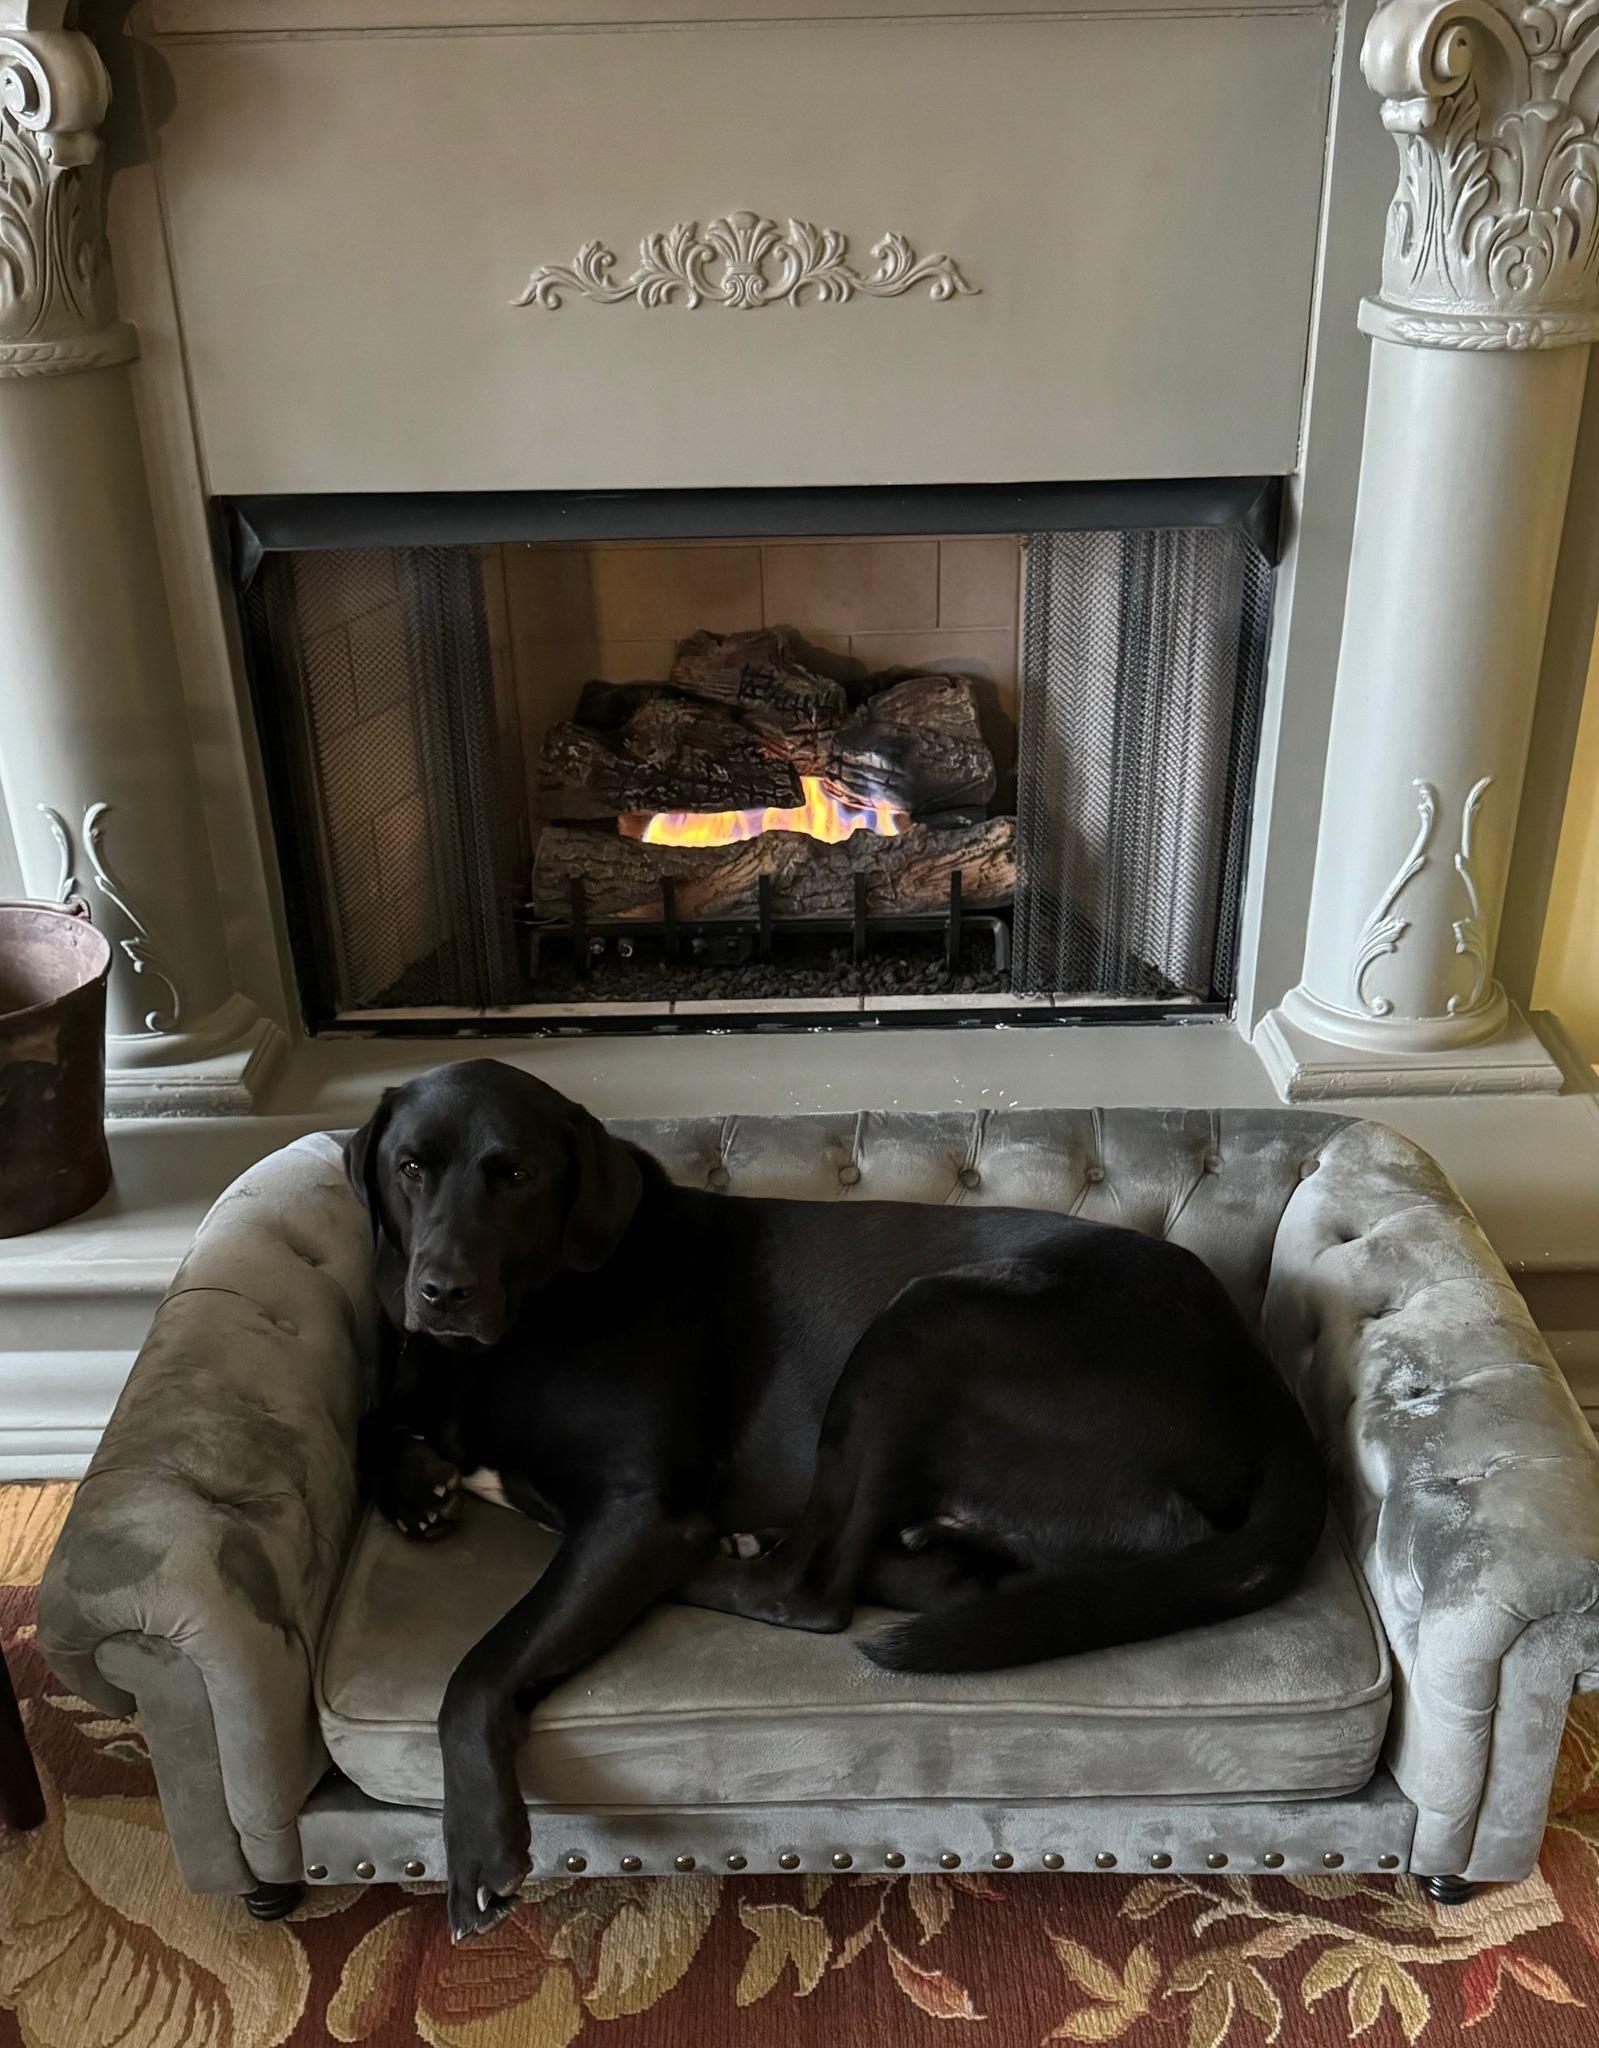 Bailey knows how to stay warm when it's cold outside! With freezing temps headed our way, now is the time to prepare to protect your pets and home. ❄️